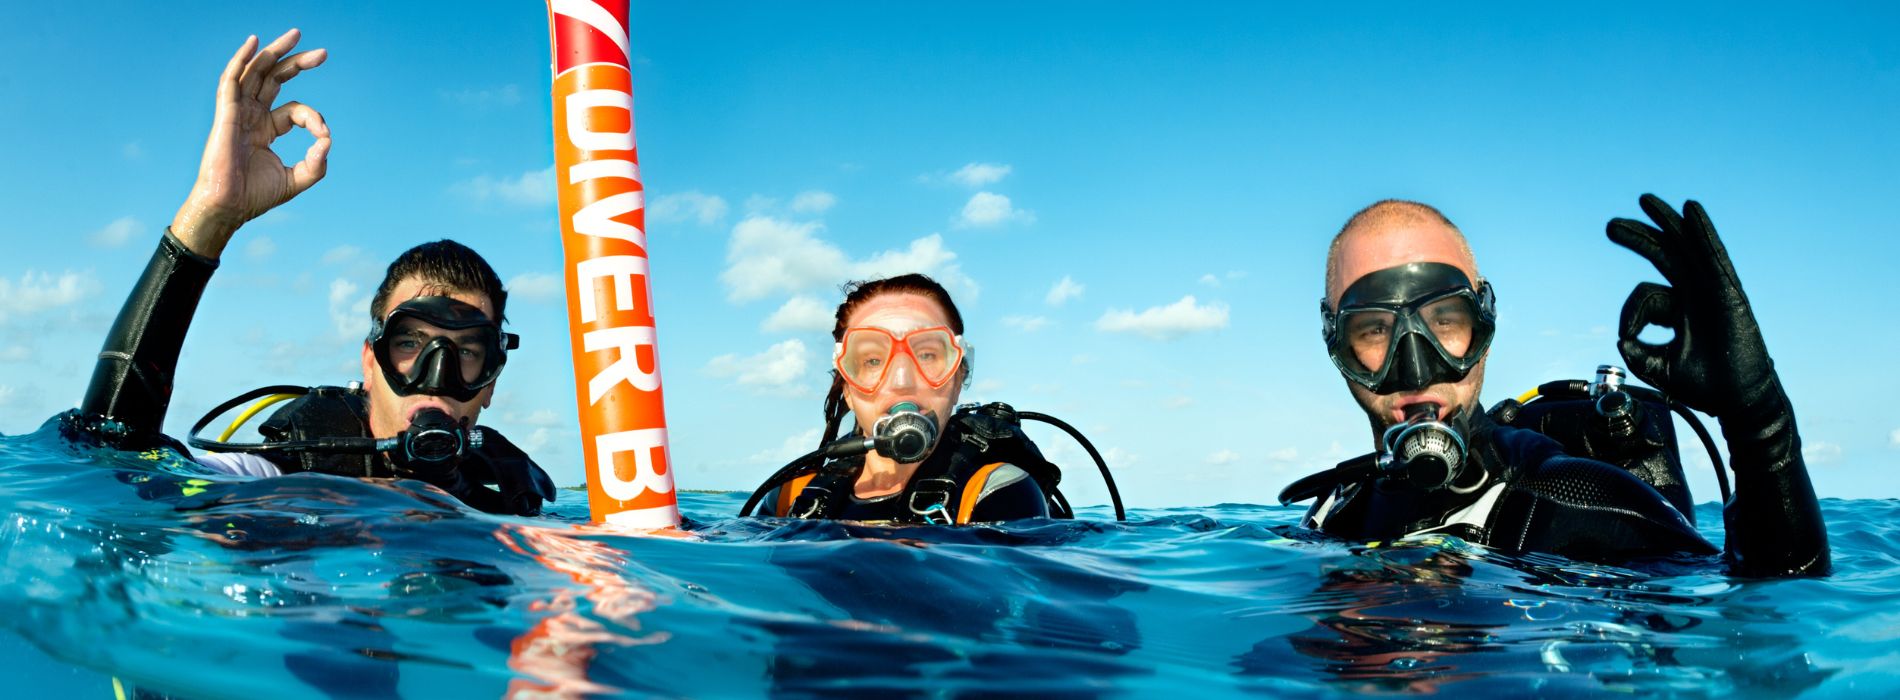 Best Places to Scuba Dive in Florida - Madeinsea©